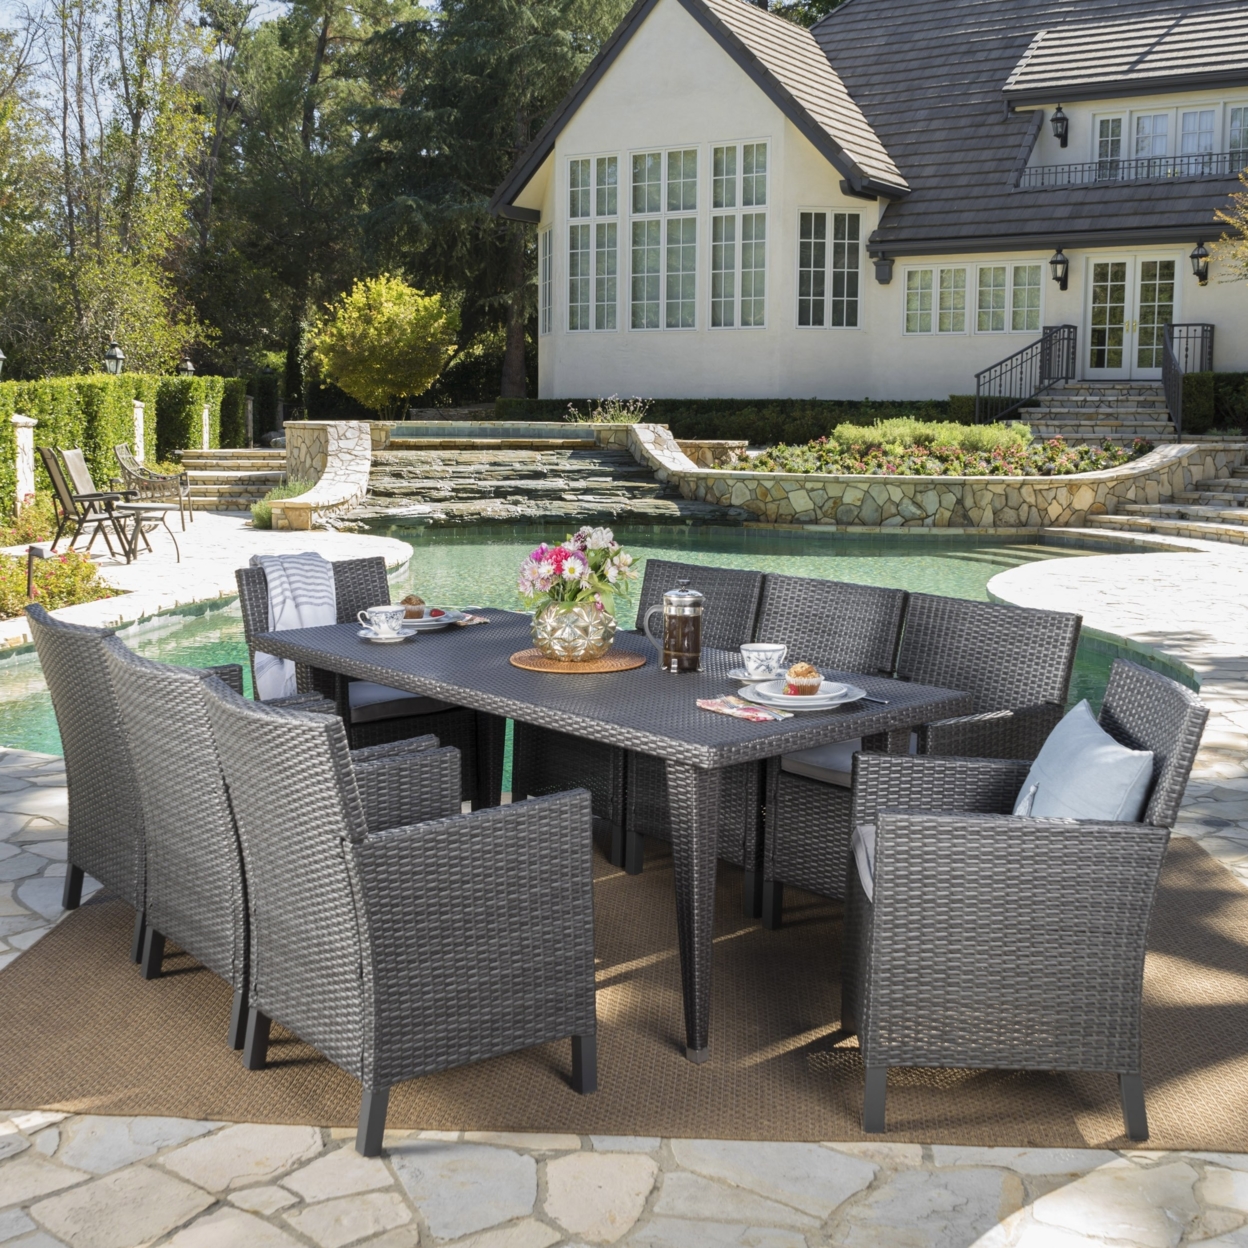 Cerrenne Outdoor 9 Piece Wicker Dining Set With Water Resistant Cushions - Multi-brown/Light Brown